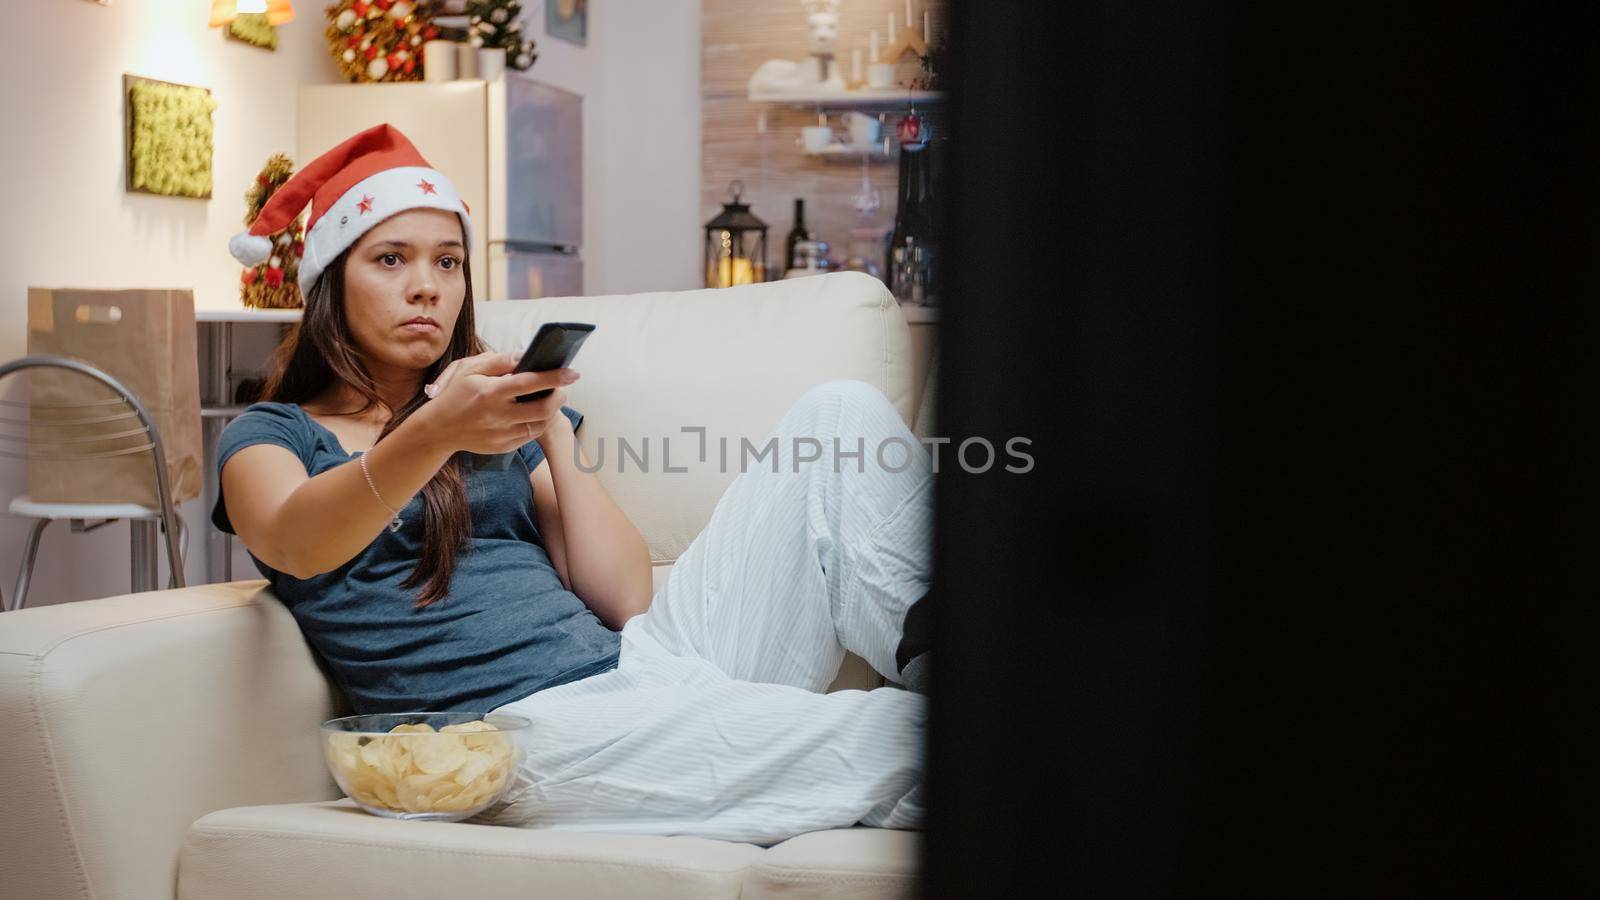 Unhappy person using TV remote control to switch channels on christmas festivity. Festive woman with santa hat watching television and eating chips from bowl to celebrate holiday